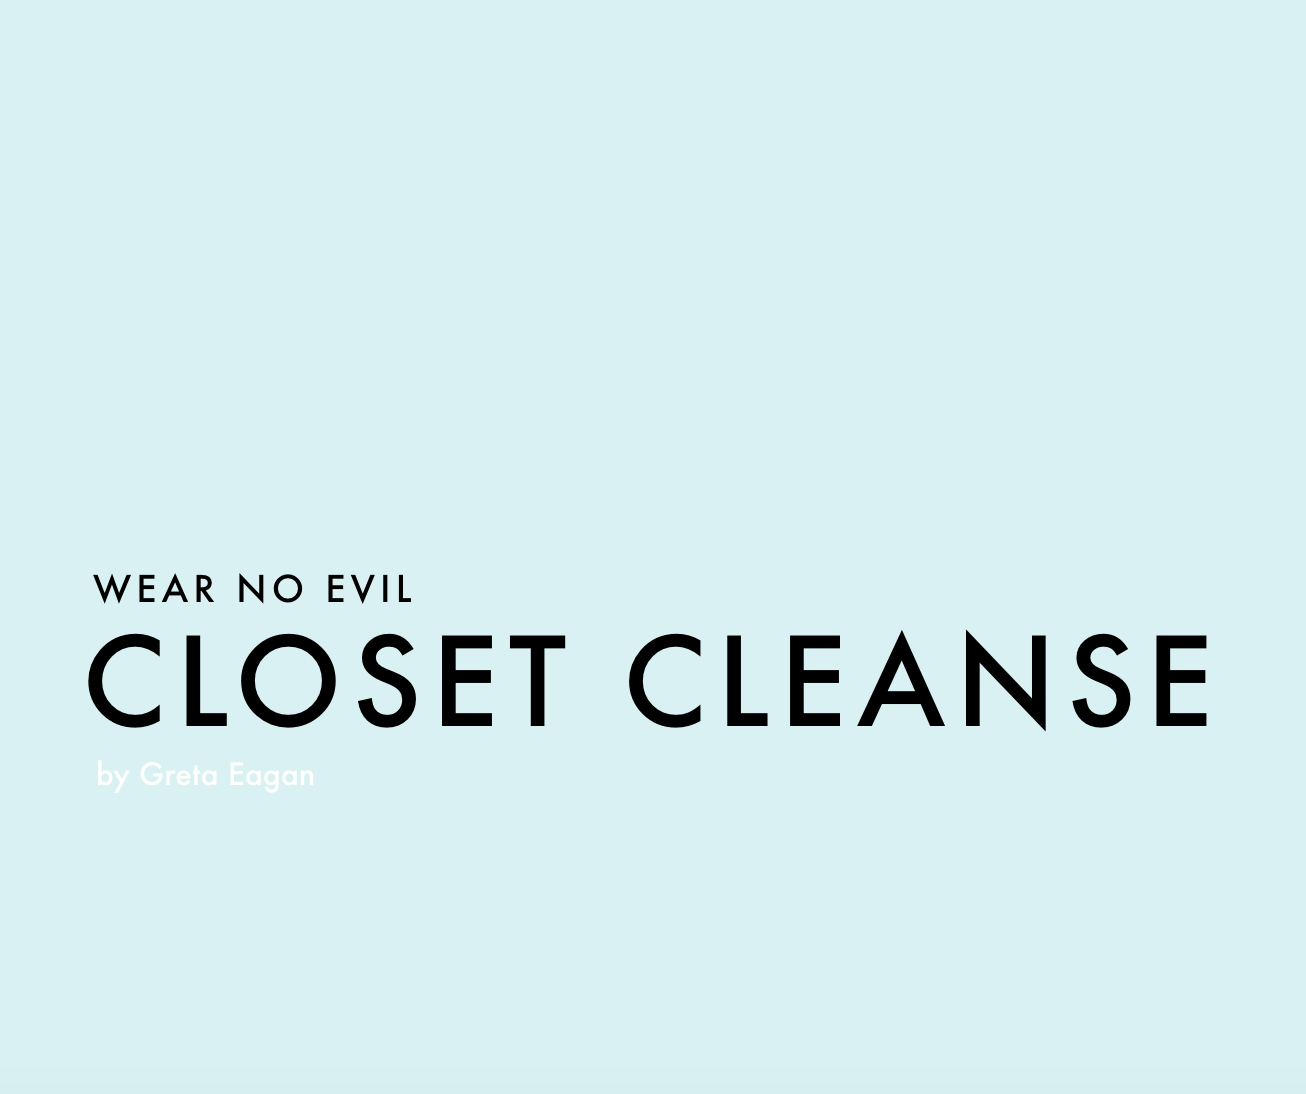 Download your Closet Cleanse Guide by Greta here